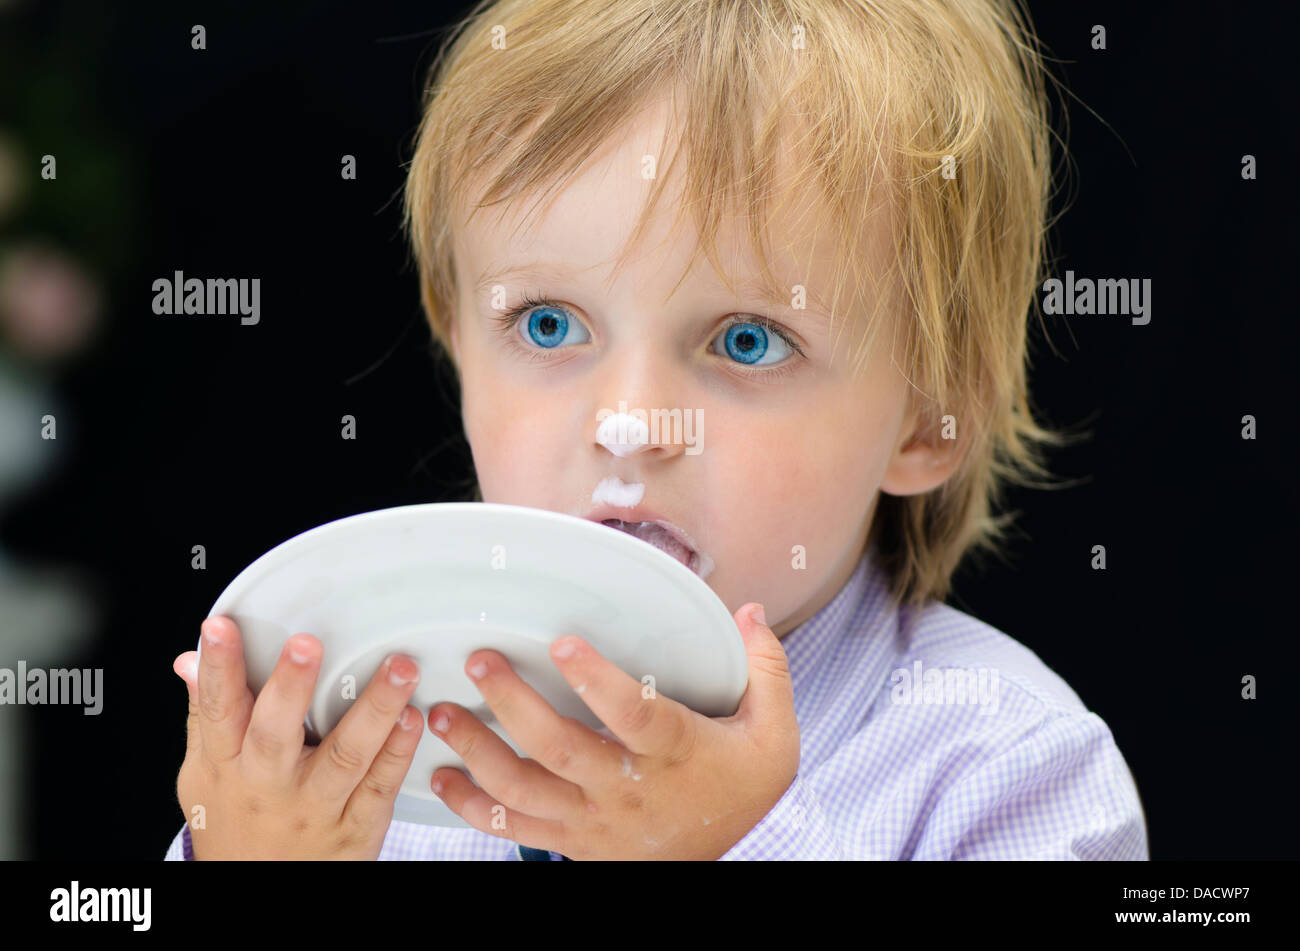 Little Boy Licking his Plate on black background Stock Photo